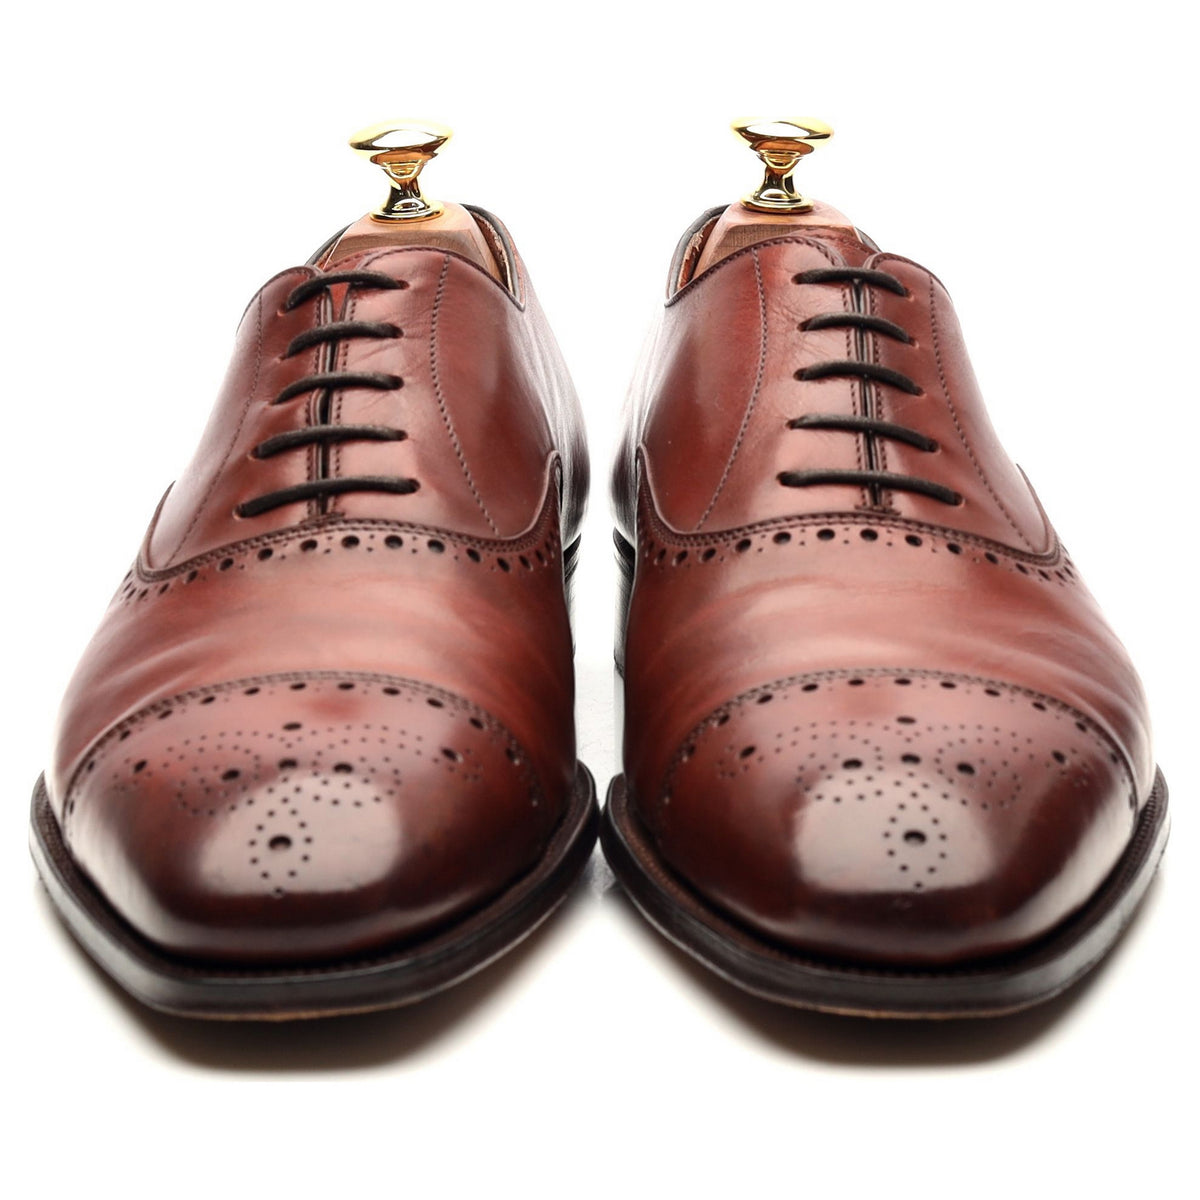 Brown Leather Oxford Brogues UK 9.5 E